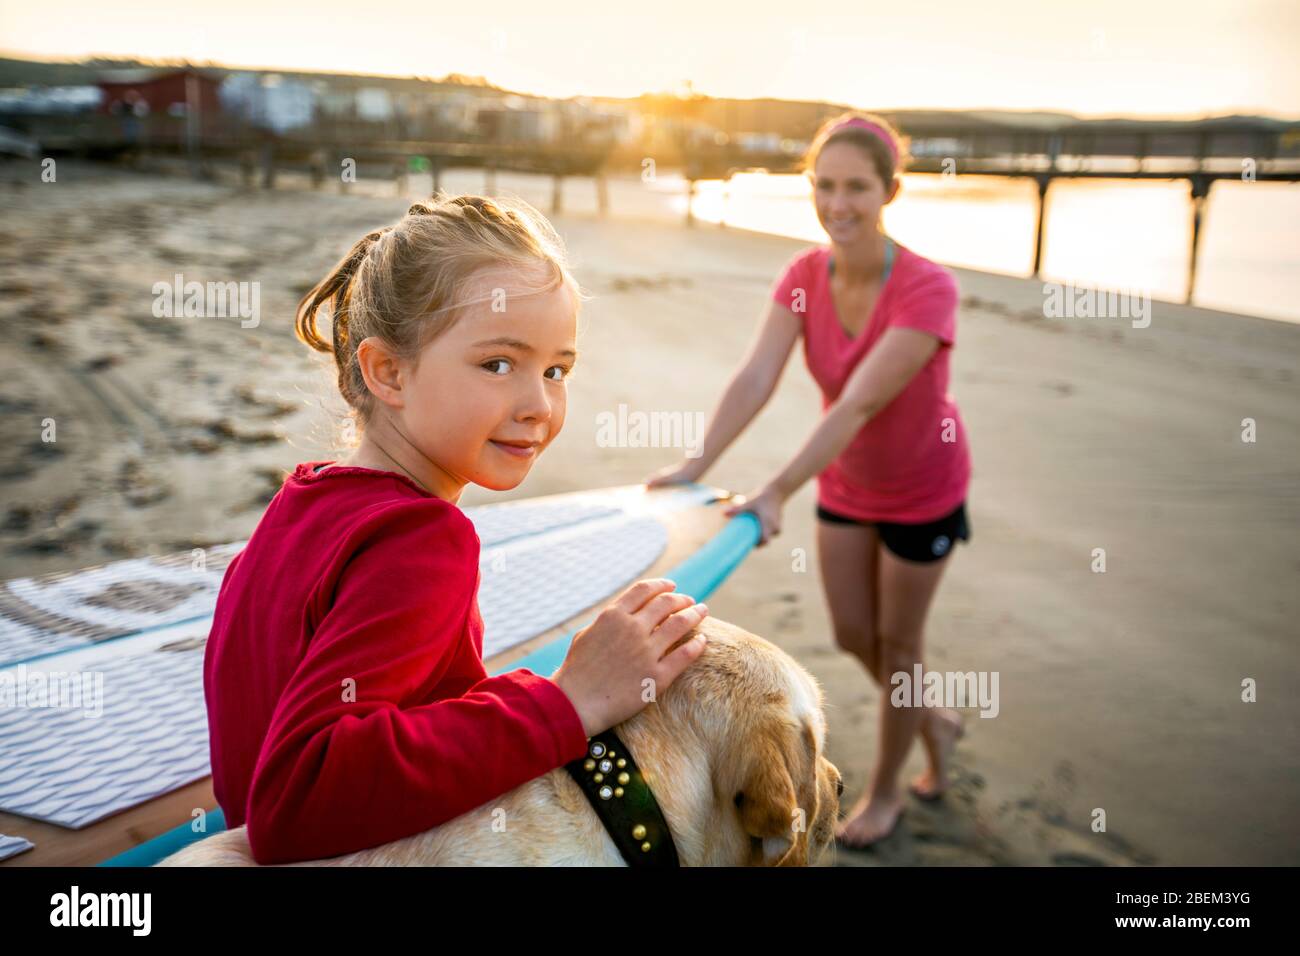 Portrait of a young girl at the beach with her mother and dog Stock Photo